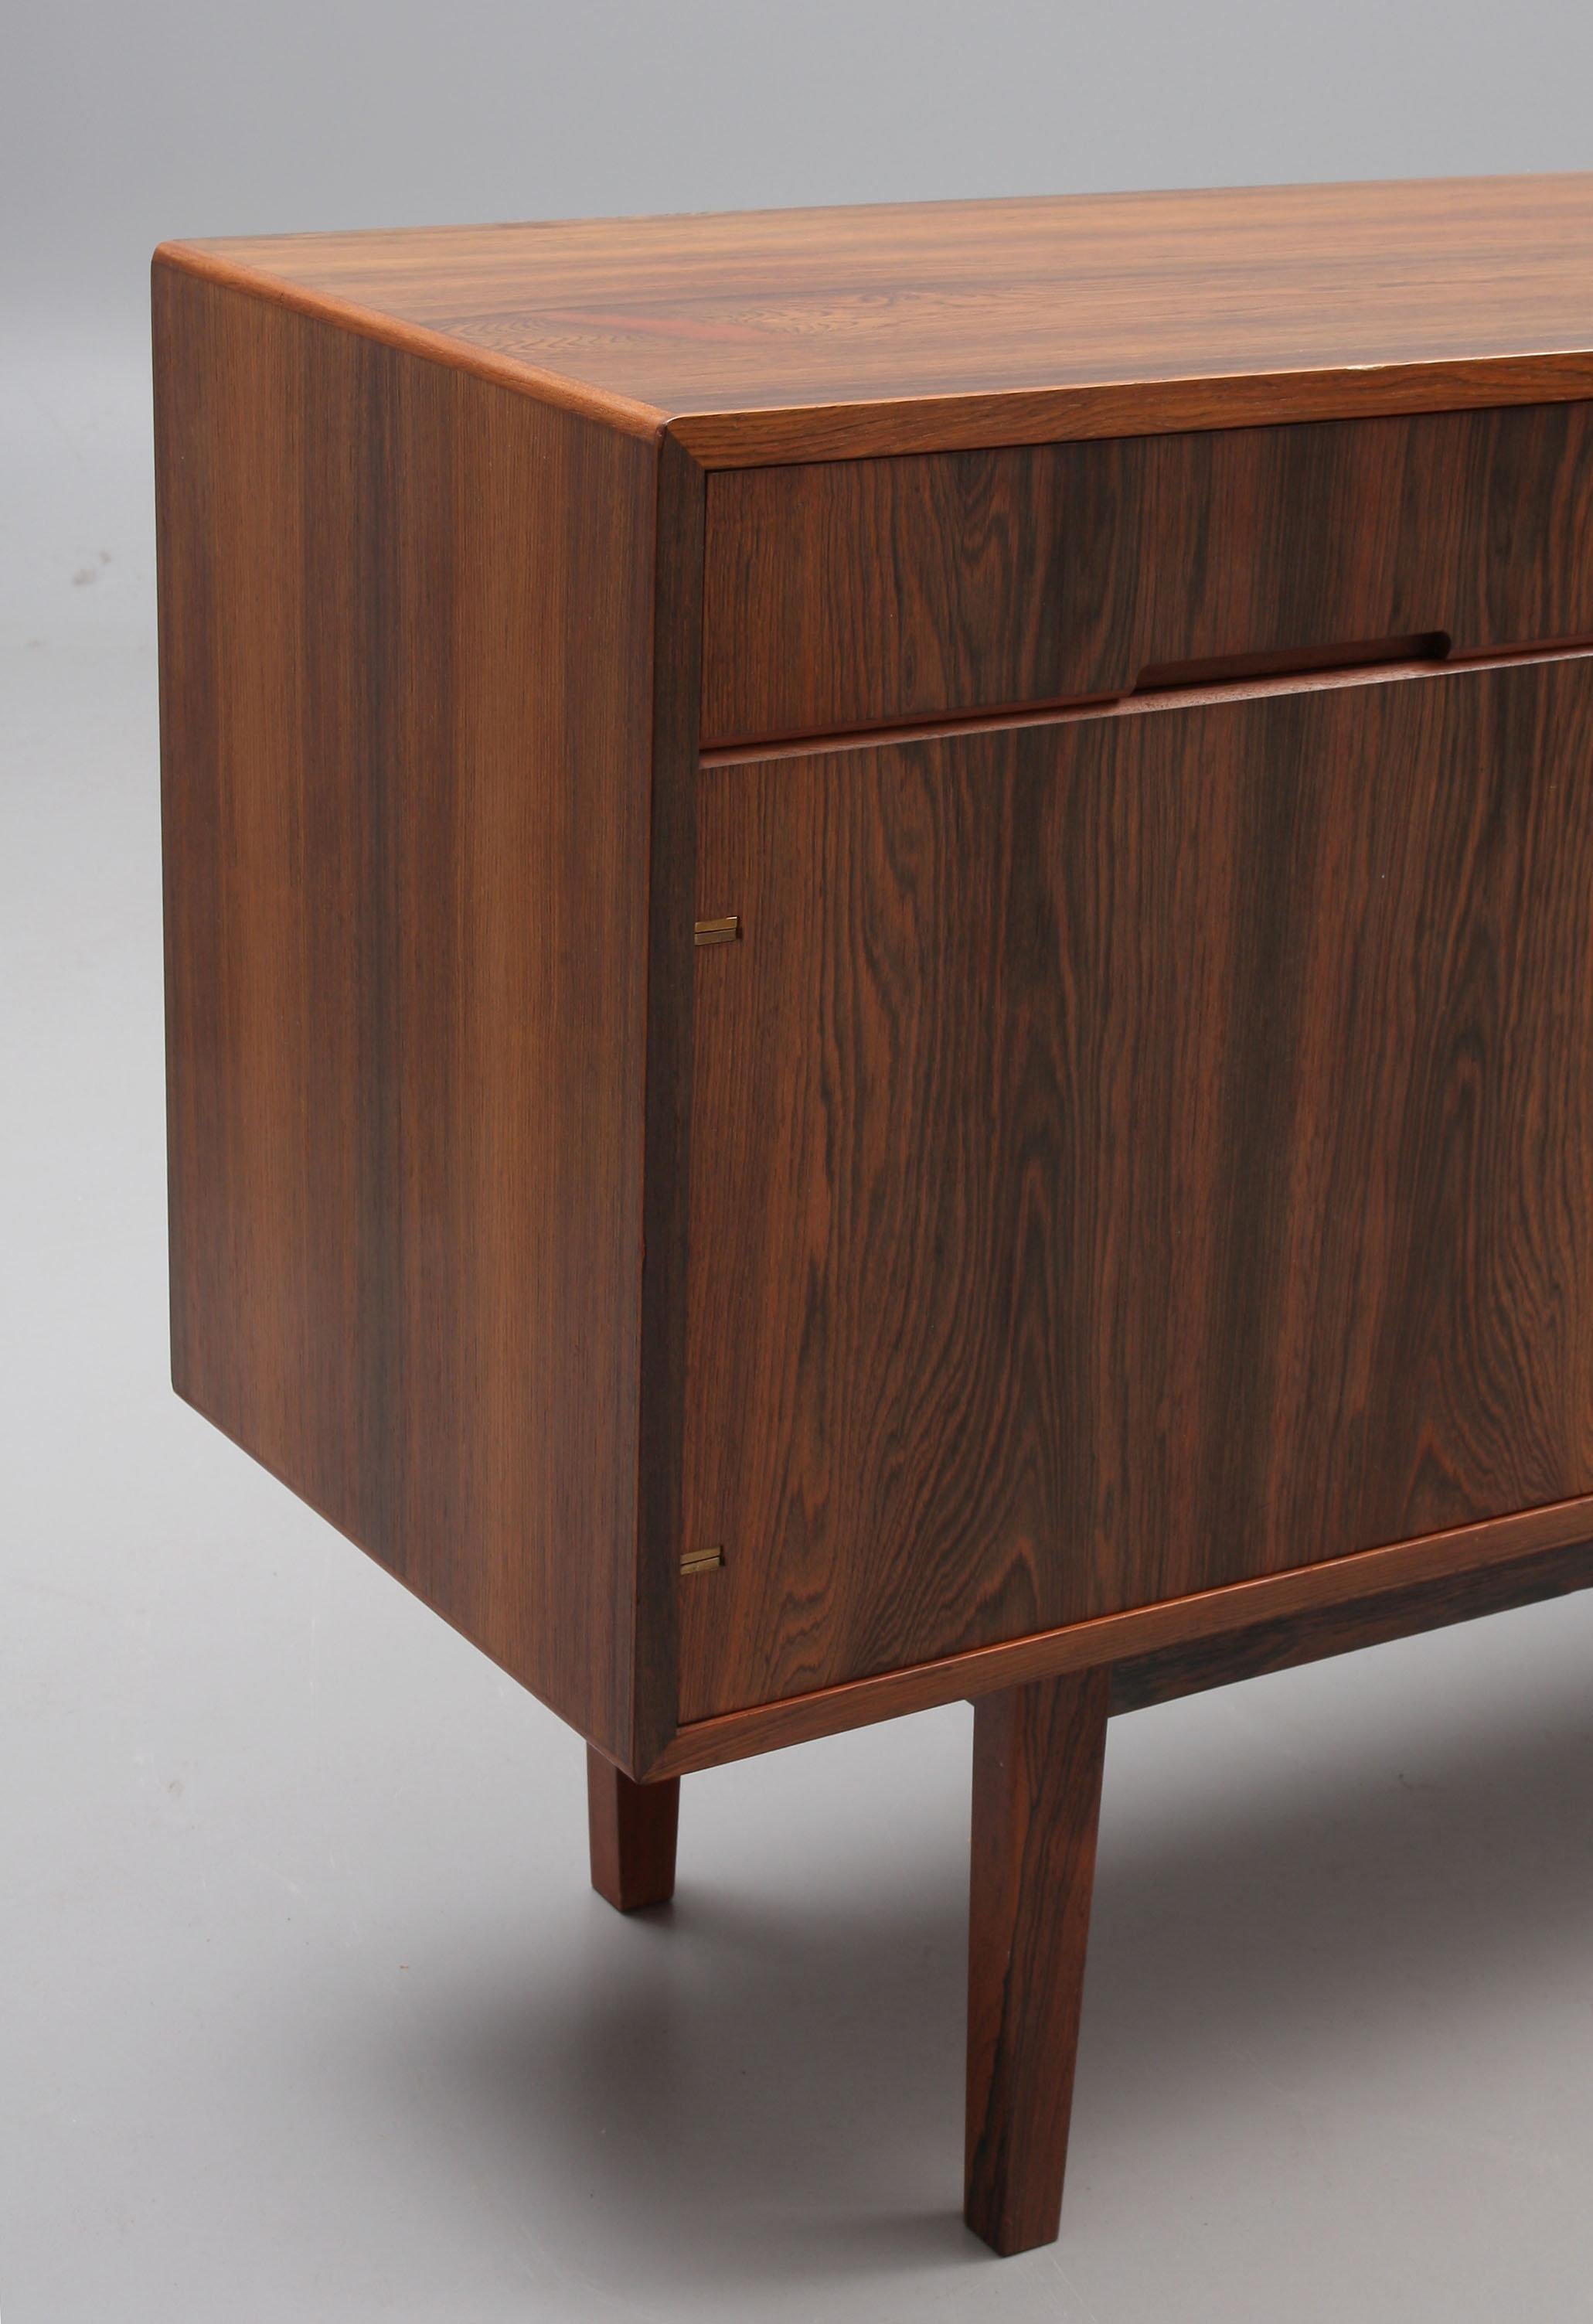 Rare sideboard Rosewood in the style of Ib Kofod-Larsen for Mobelfabrik, 1960
the sideboard features four doors that are tightly fitted side by side, creating a magnificent flat rosewood wall on the front. Only the best veneer parts have been used